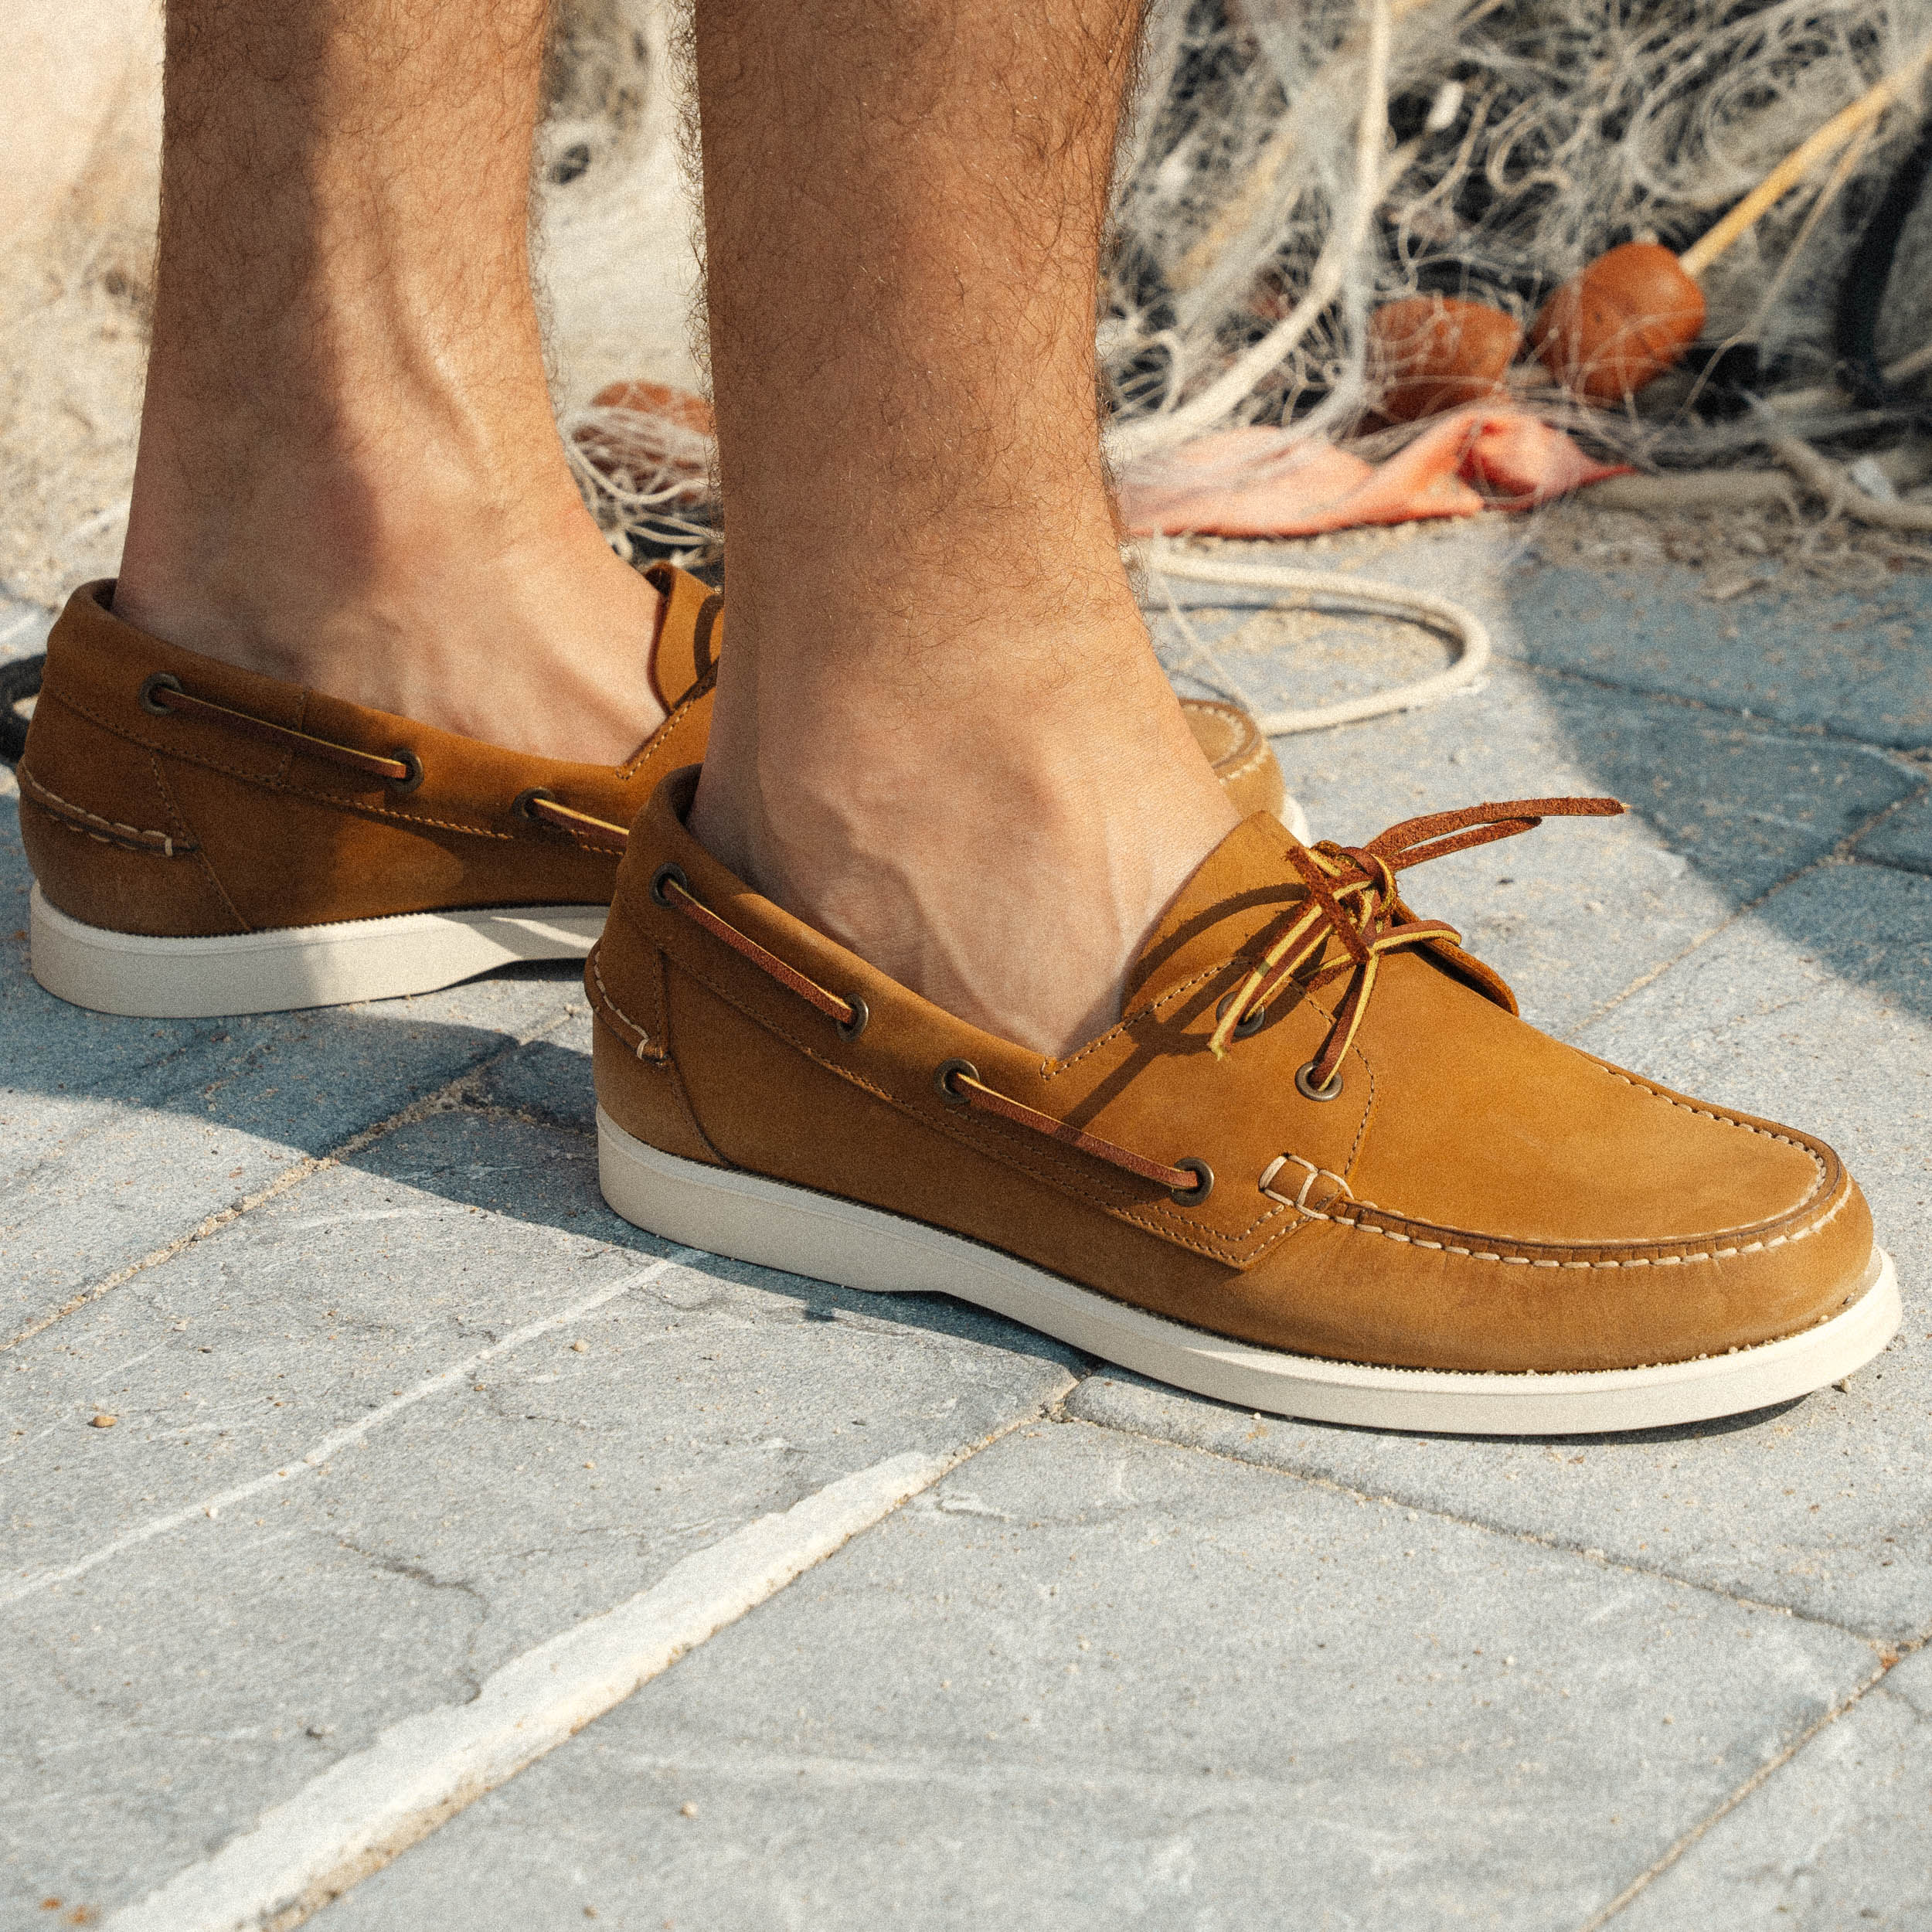 Brown Boat Shoes with Chinos